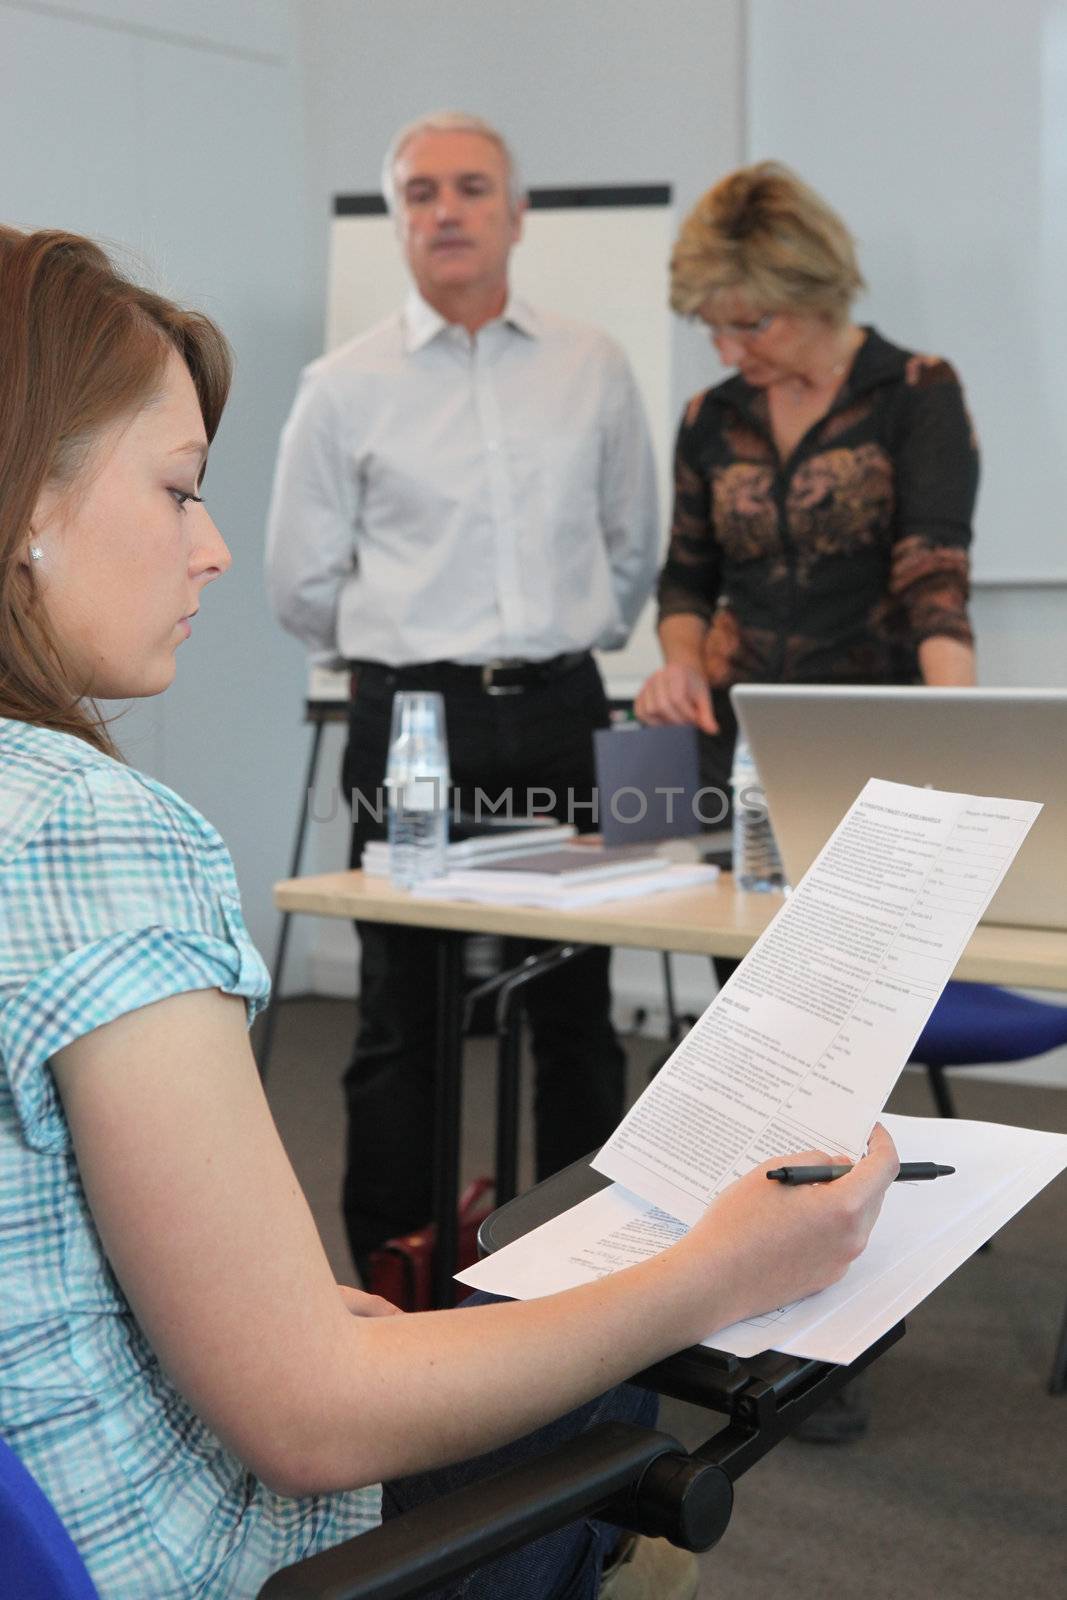 young woman in examination